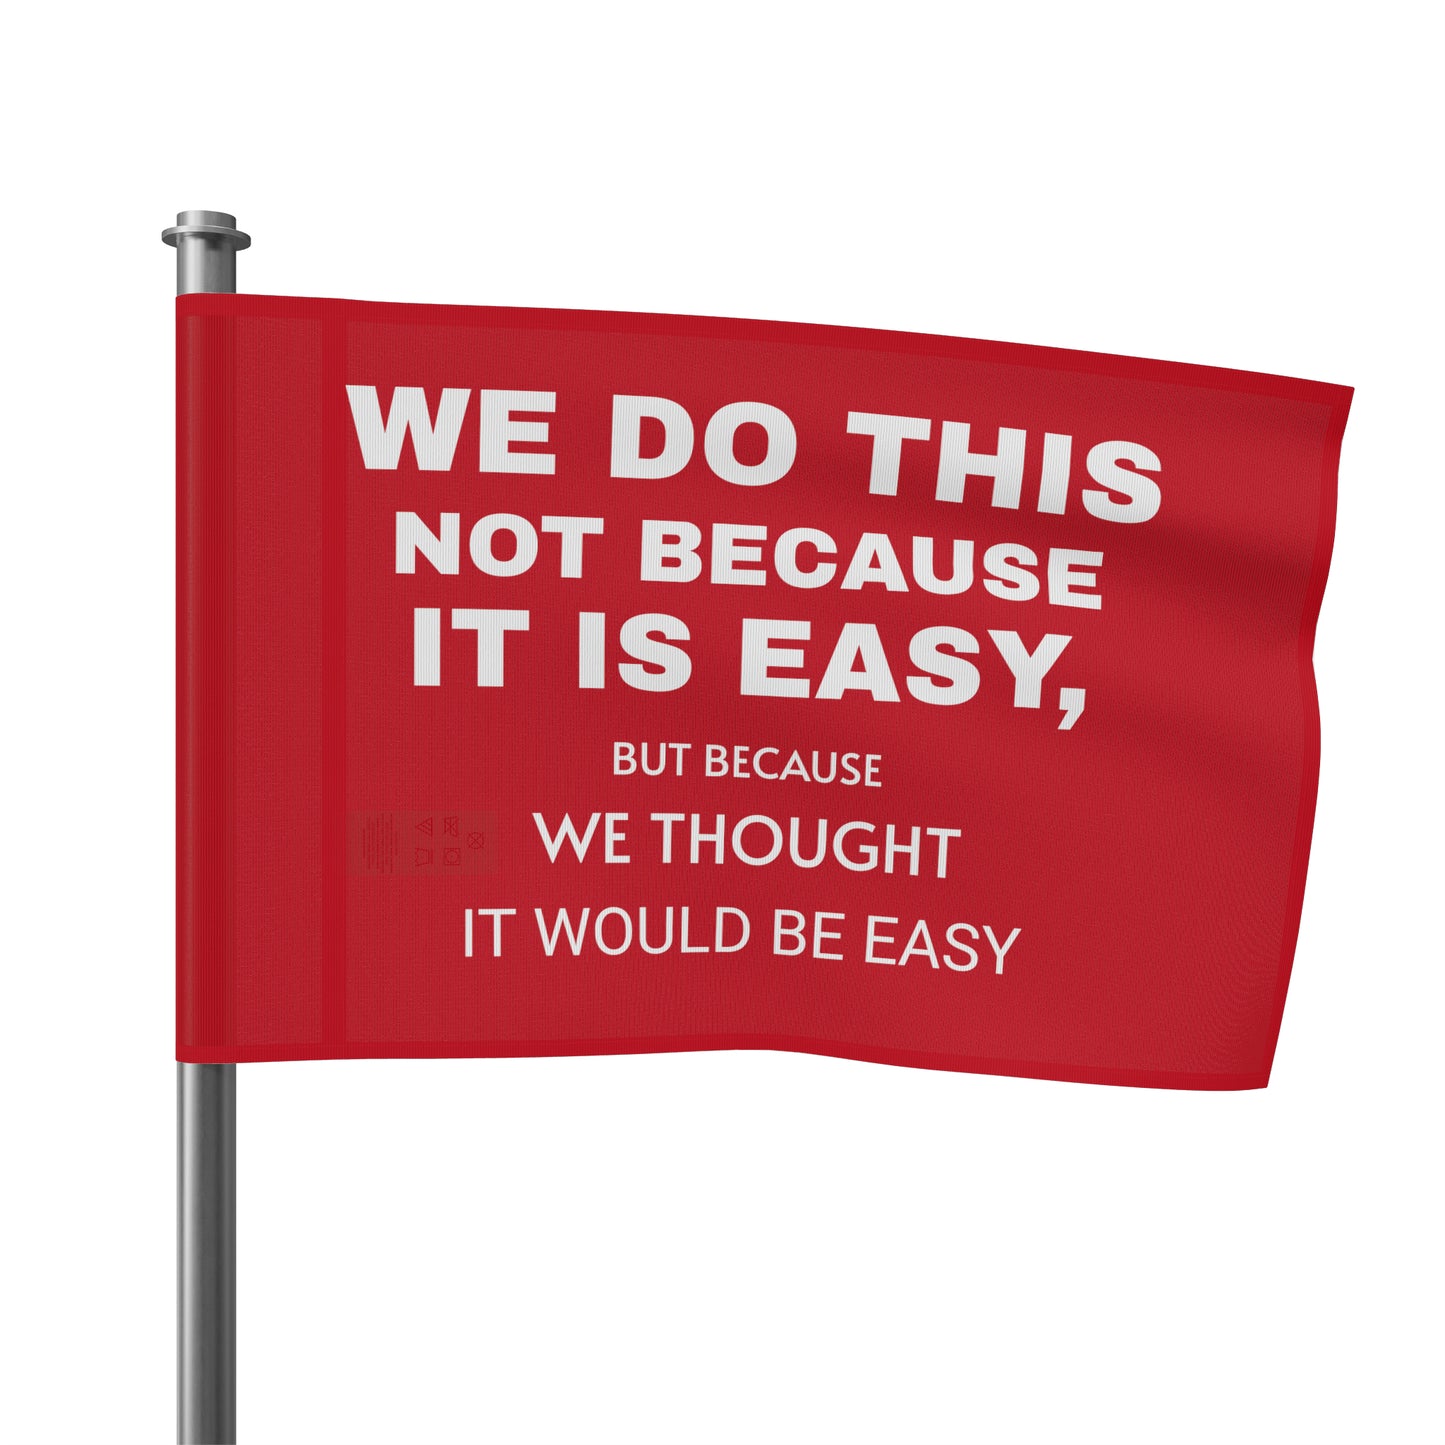 We do this not because it's easy - Flag